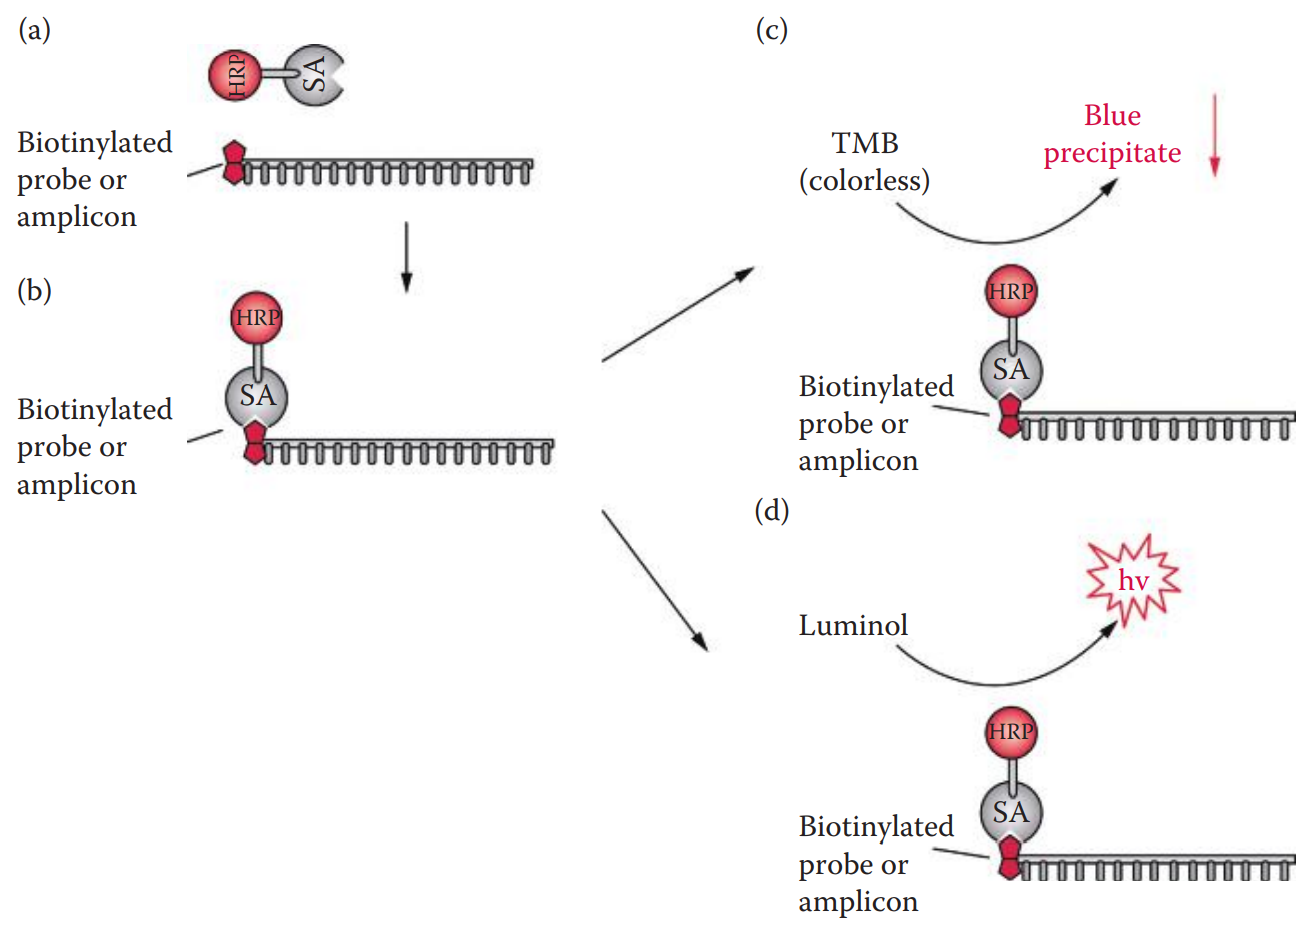 Detection system using biotinylated DNA probes with colorimetric and chemiluminescent reactions. (a) Biotinylated probe is incubated with a streptavidin (SA) and horseradish peroxidase (HRP) conjugate complex. (b) Biotin is recognized by the complex. Reporter enzyme assays can be carried out using either a colorimetric reaction with a TMB substrate (c) or a chemiluminescent reaction using luminol analogs (d).